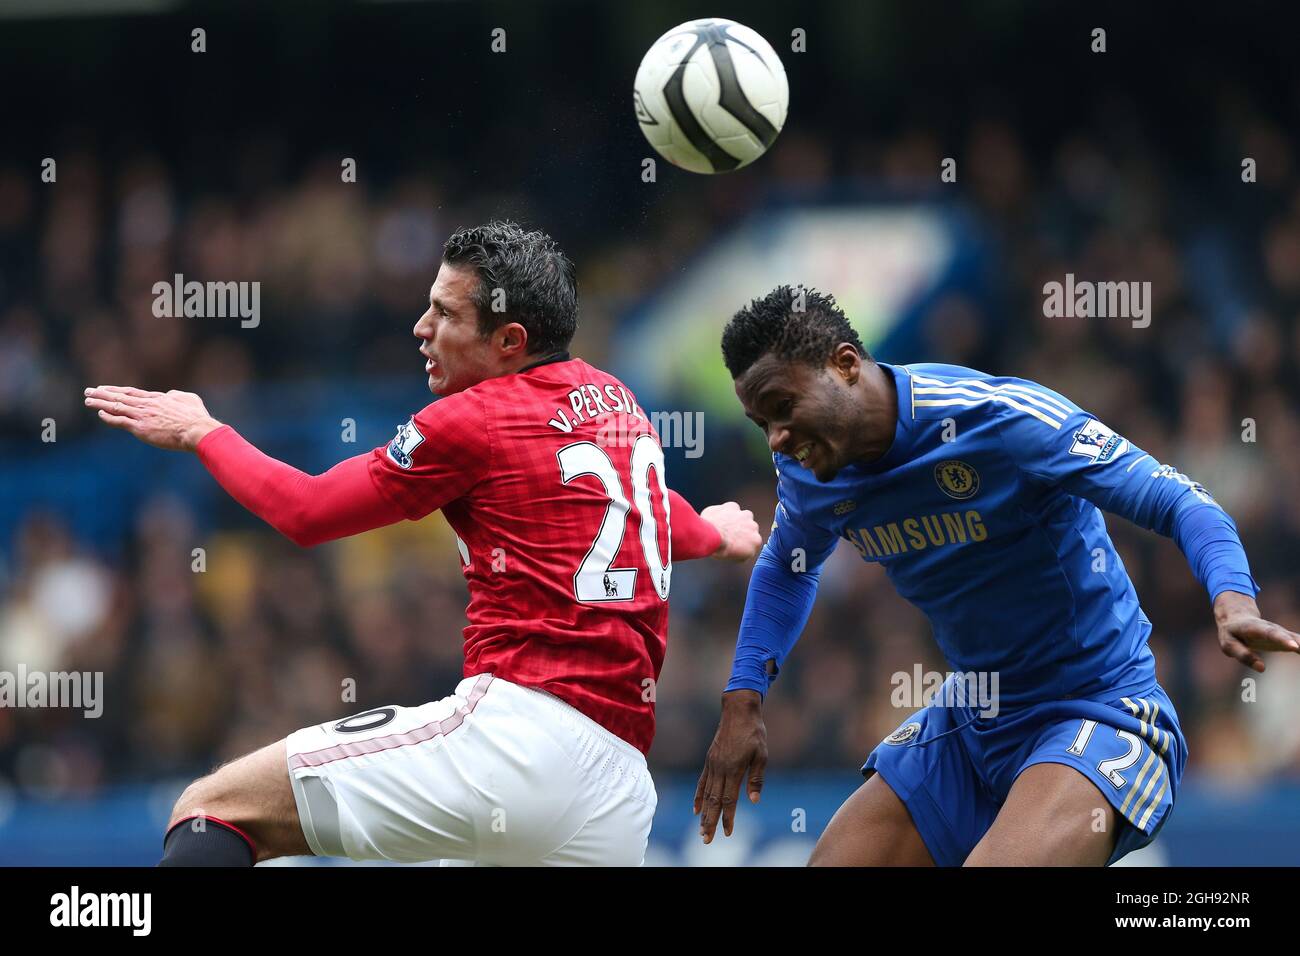 Manchester United's Robin van Persie and John Mikel Obi of Chelsea in action during the FA Cup Final Replay match between Chelsea and Manchester United at Stamford Bridge, London on April 1, 2013. Stock Photo